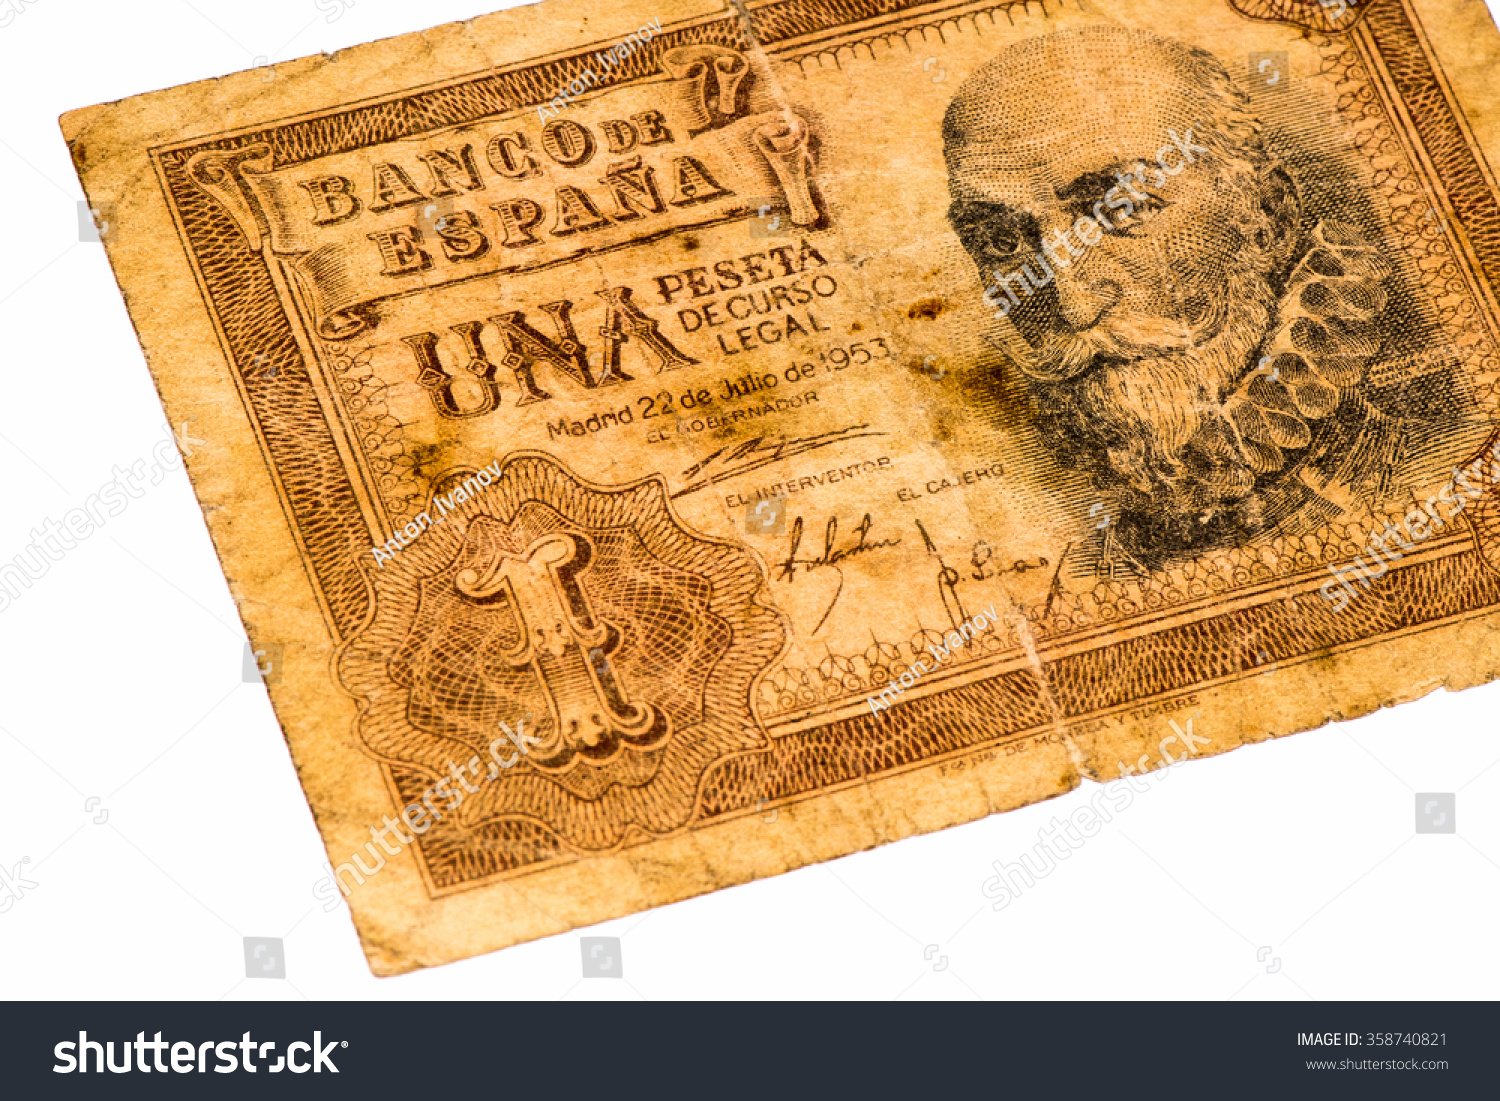 1 Spanish Peseta Bank Note Peso Is The Former Currency Of Spain Stock